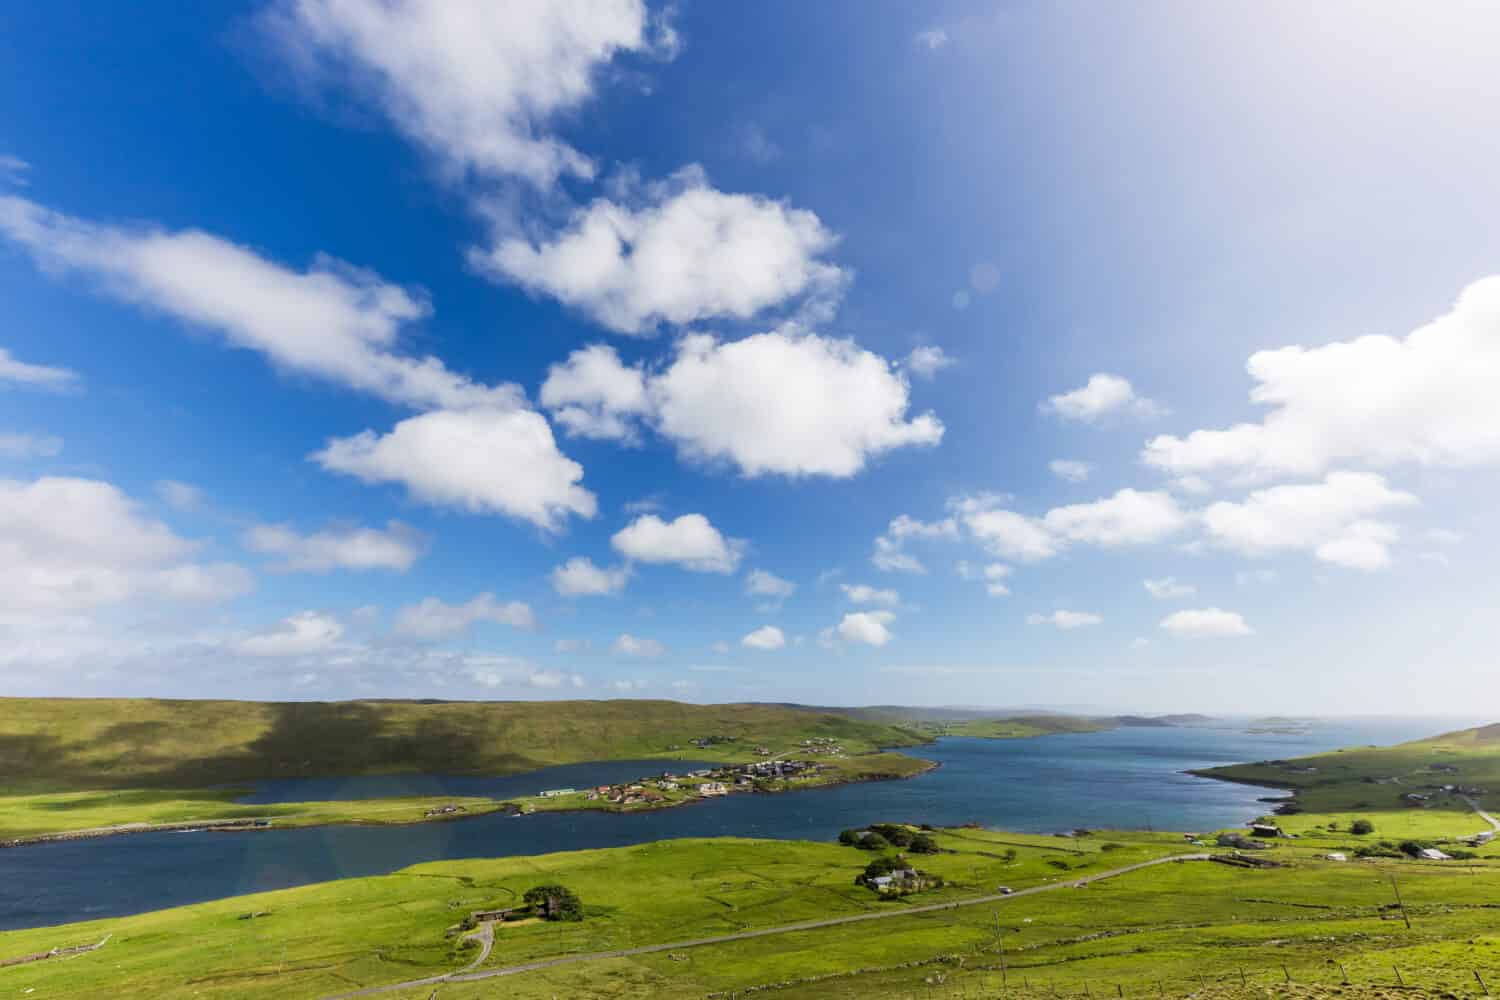 Spectacular landscape of the remote and scenic Shetland Islands